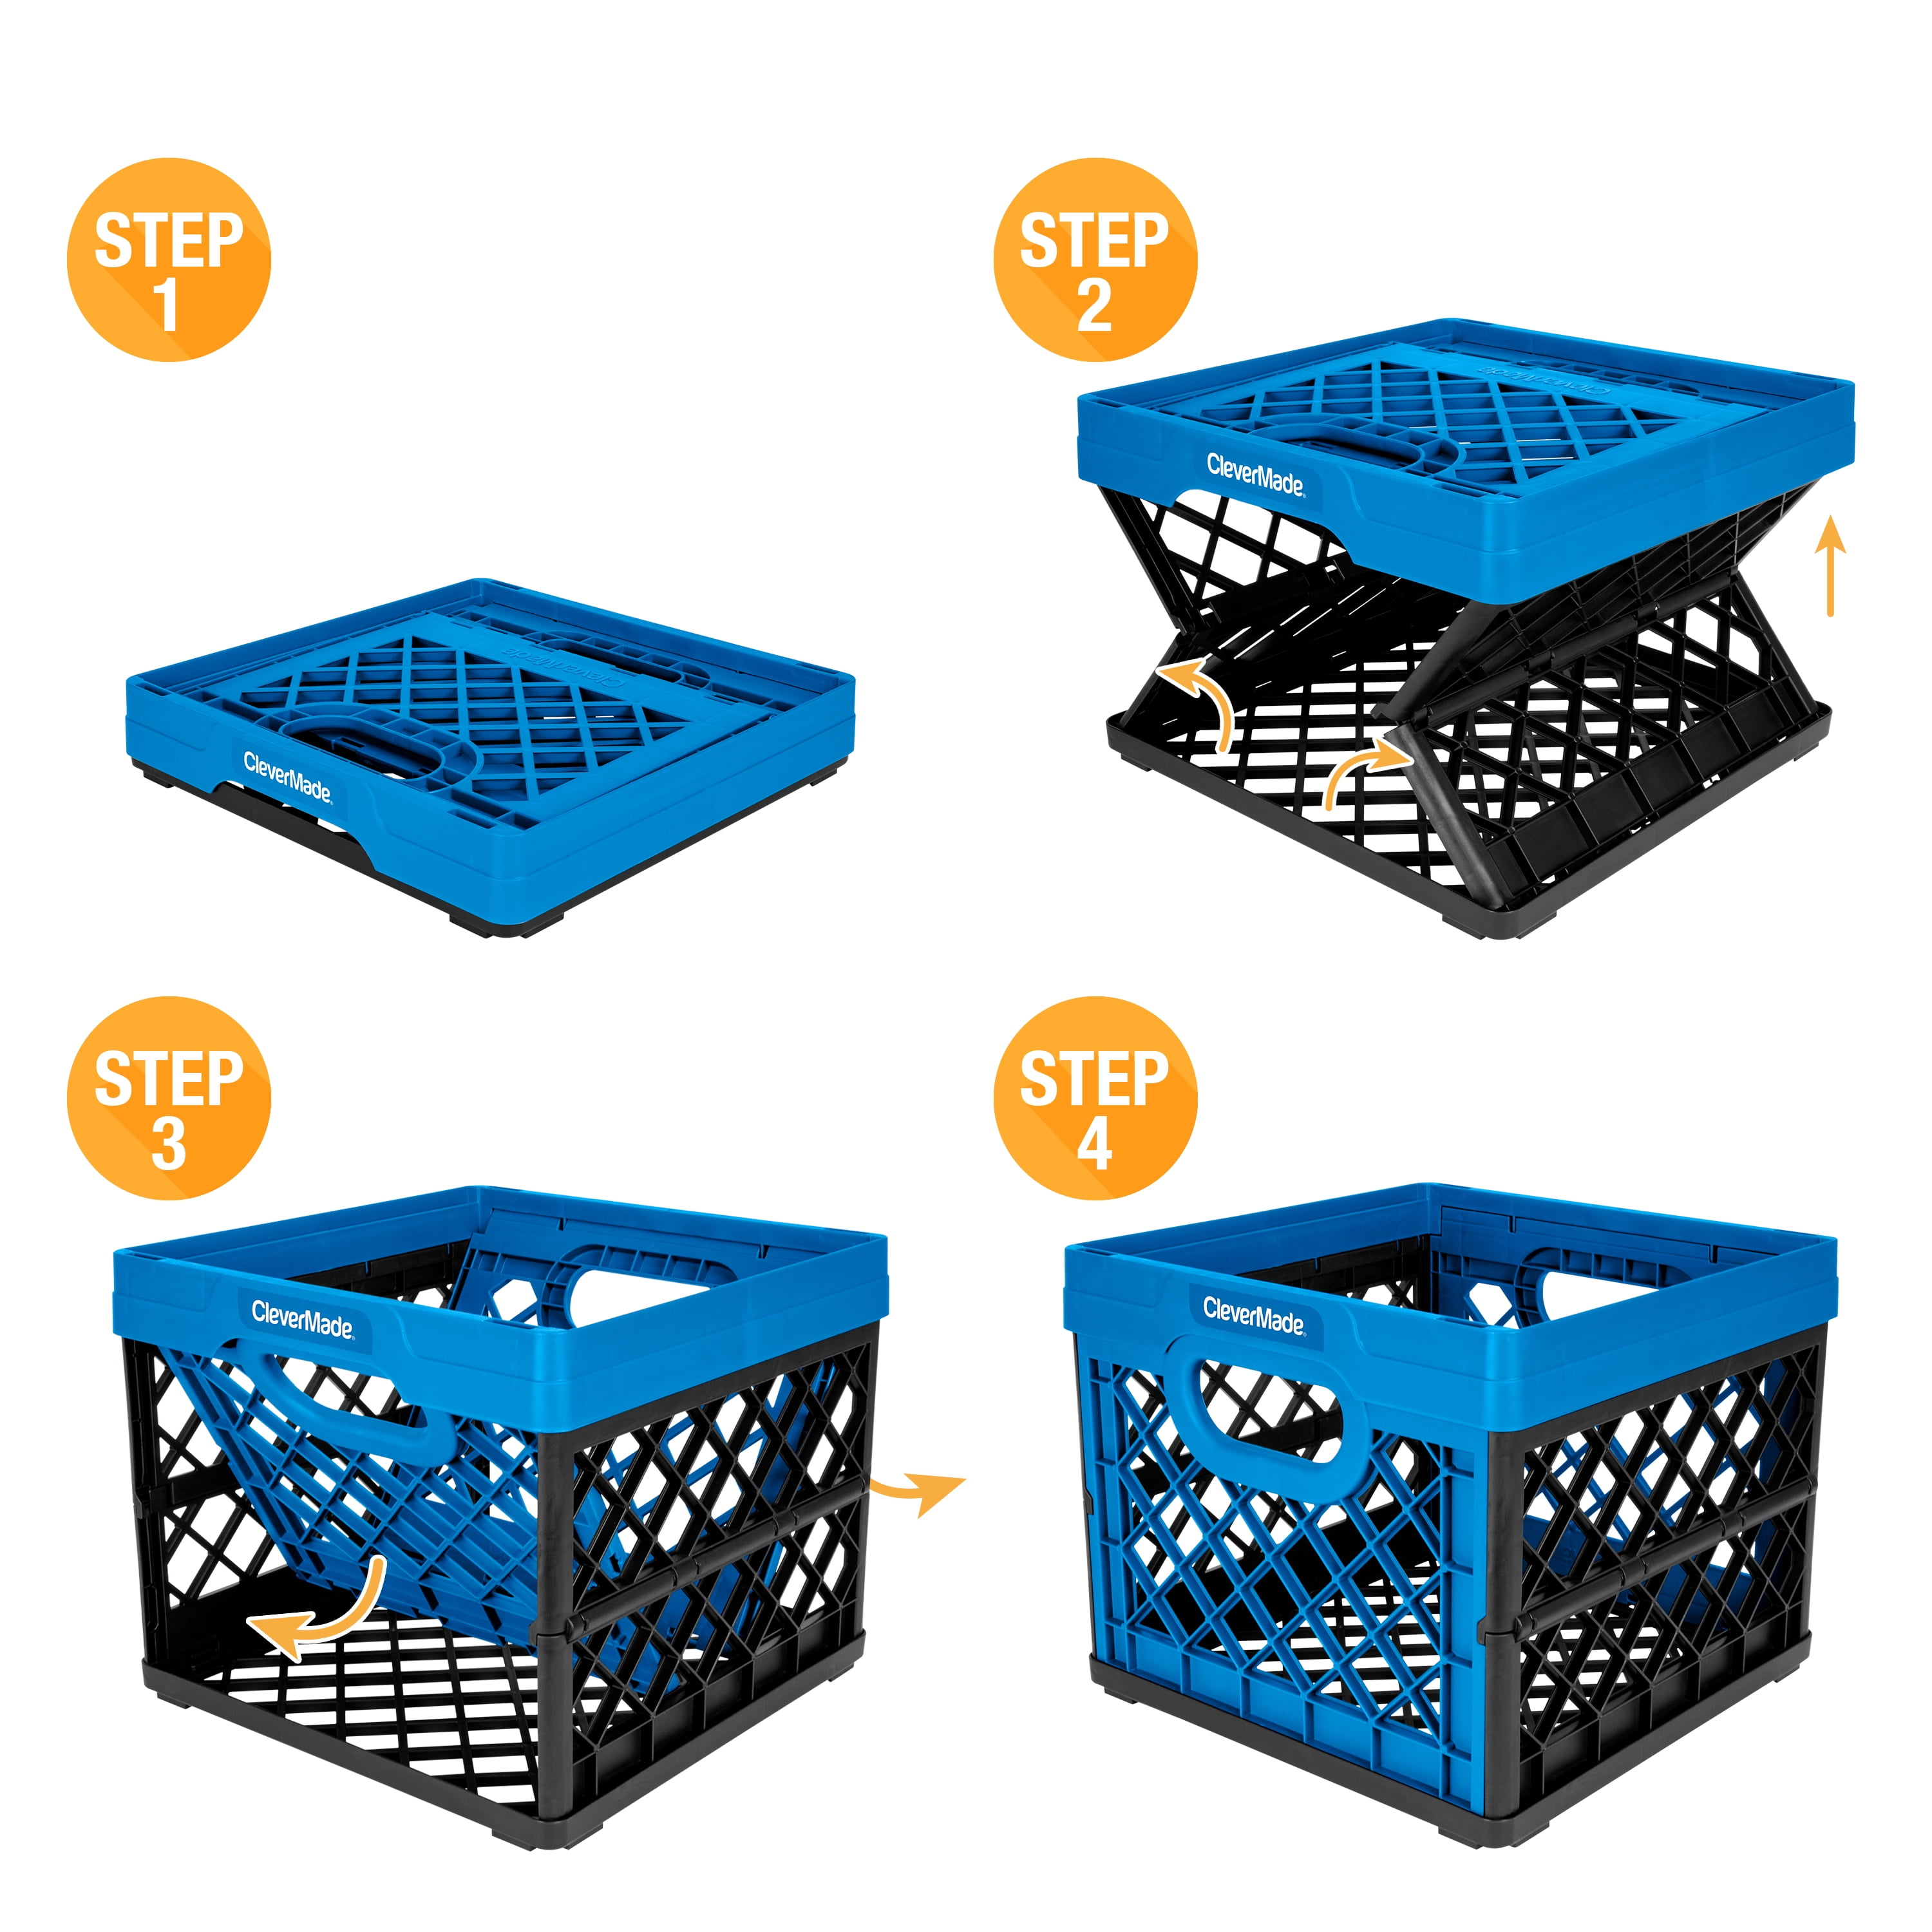 CleverMade Milk Crates 32L CleverCrates Pack of 3 Blue Pack of 3 25L Plastic Stackable Storage Bins CleverCrates Utility Folding Baskets Blue & Collapsible Plastic Storage Bins with Handles 